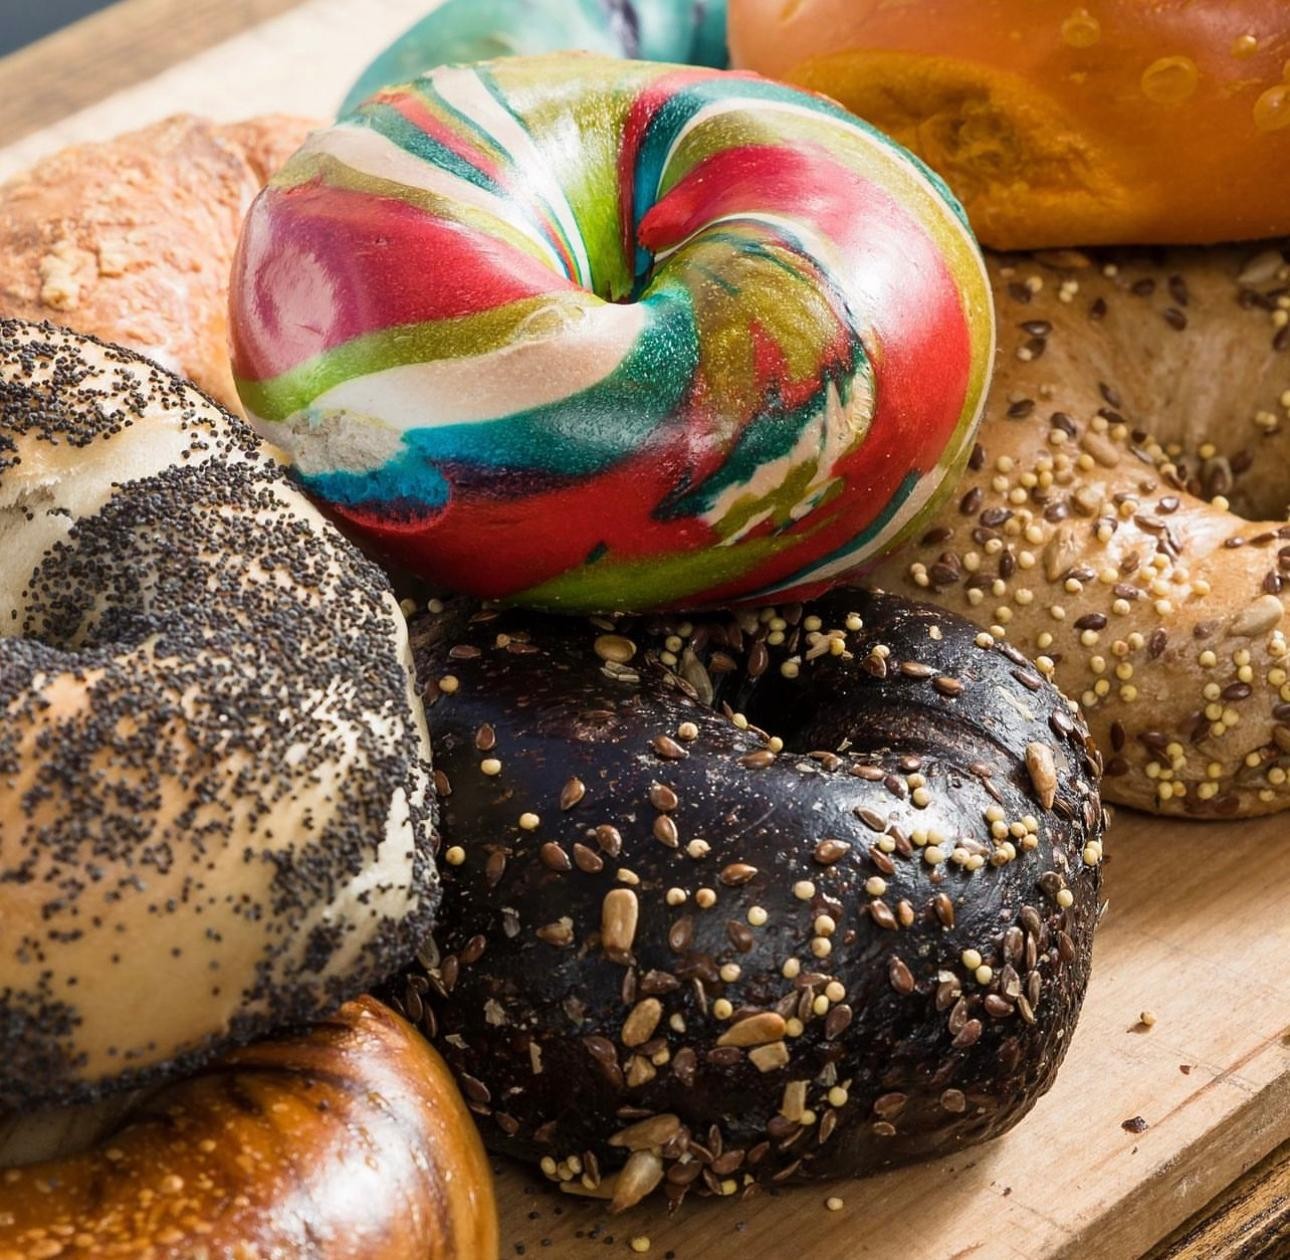 Bagel "All The Way"